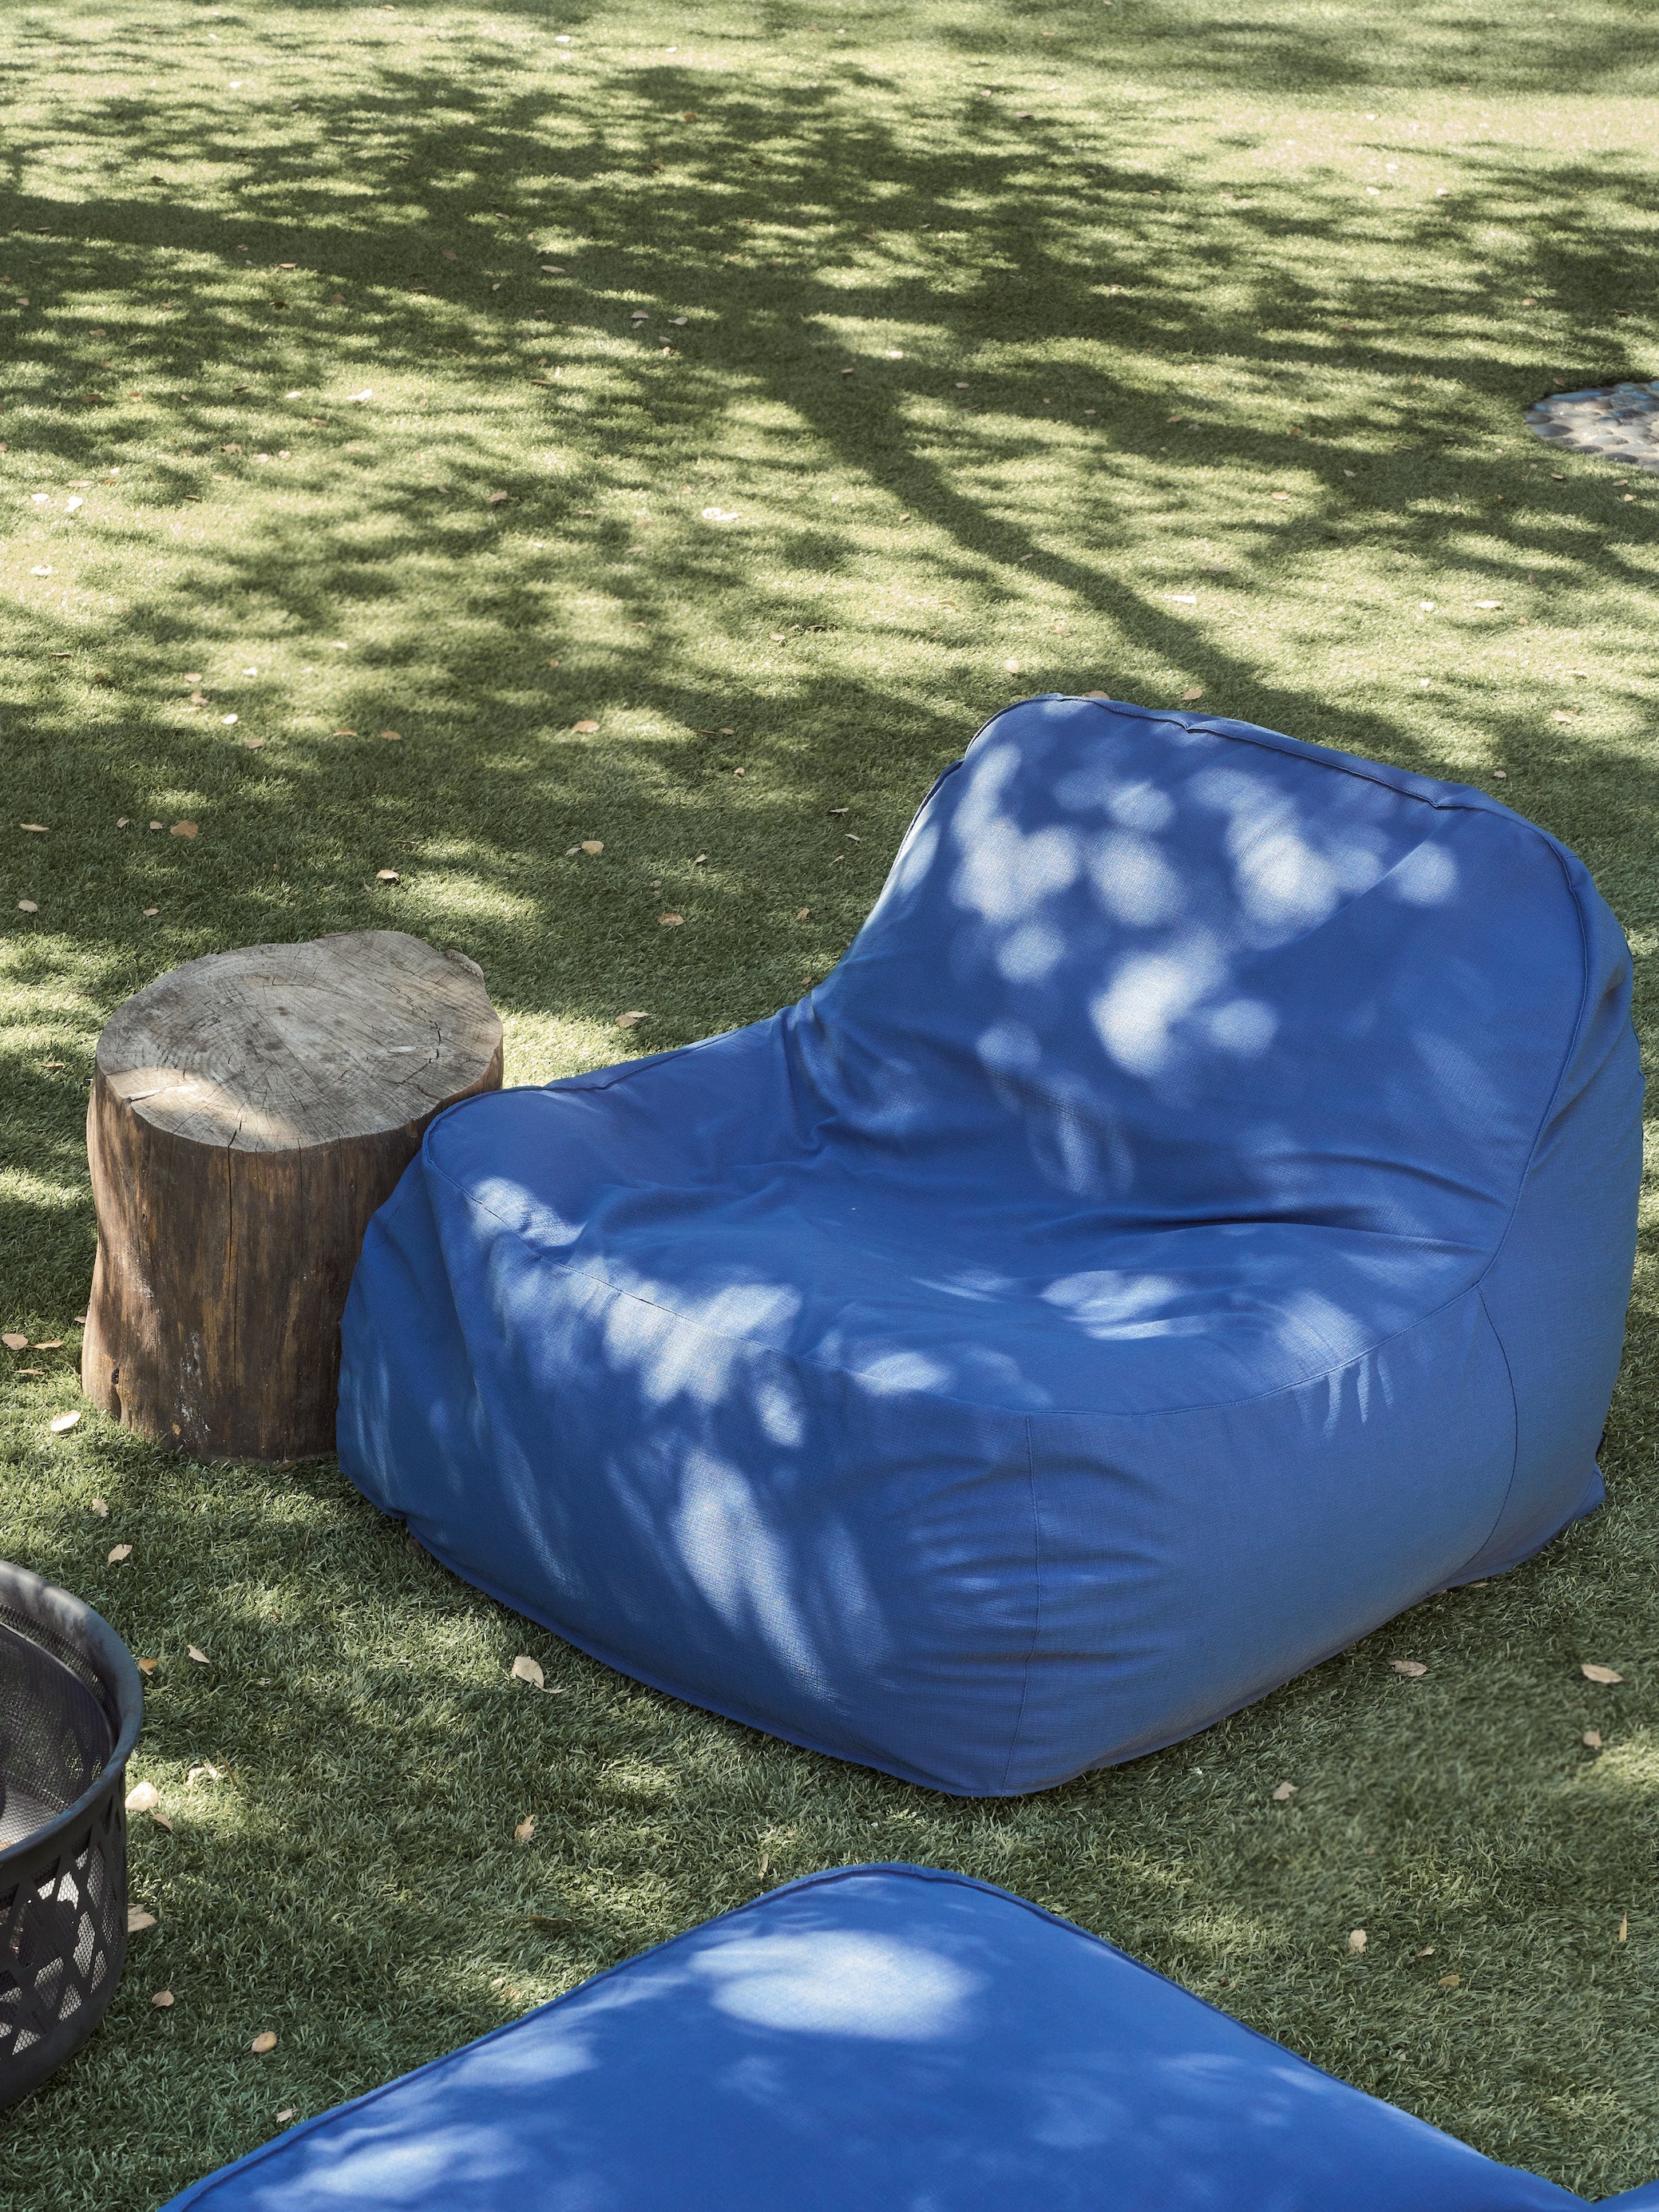 Gardenista Adult Bean Bag Chair for Outdoor UV Protected Comfy